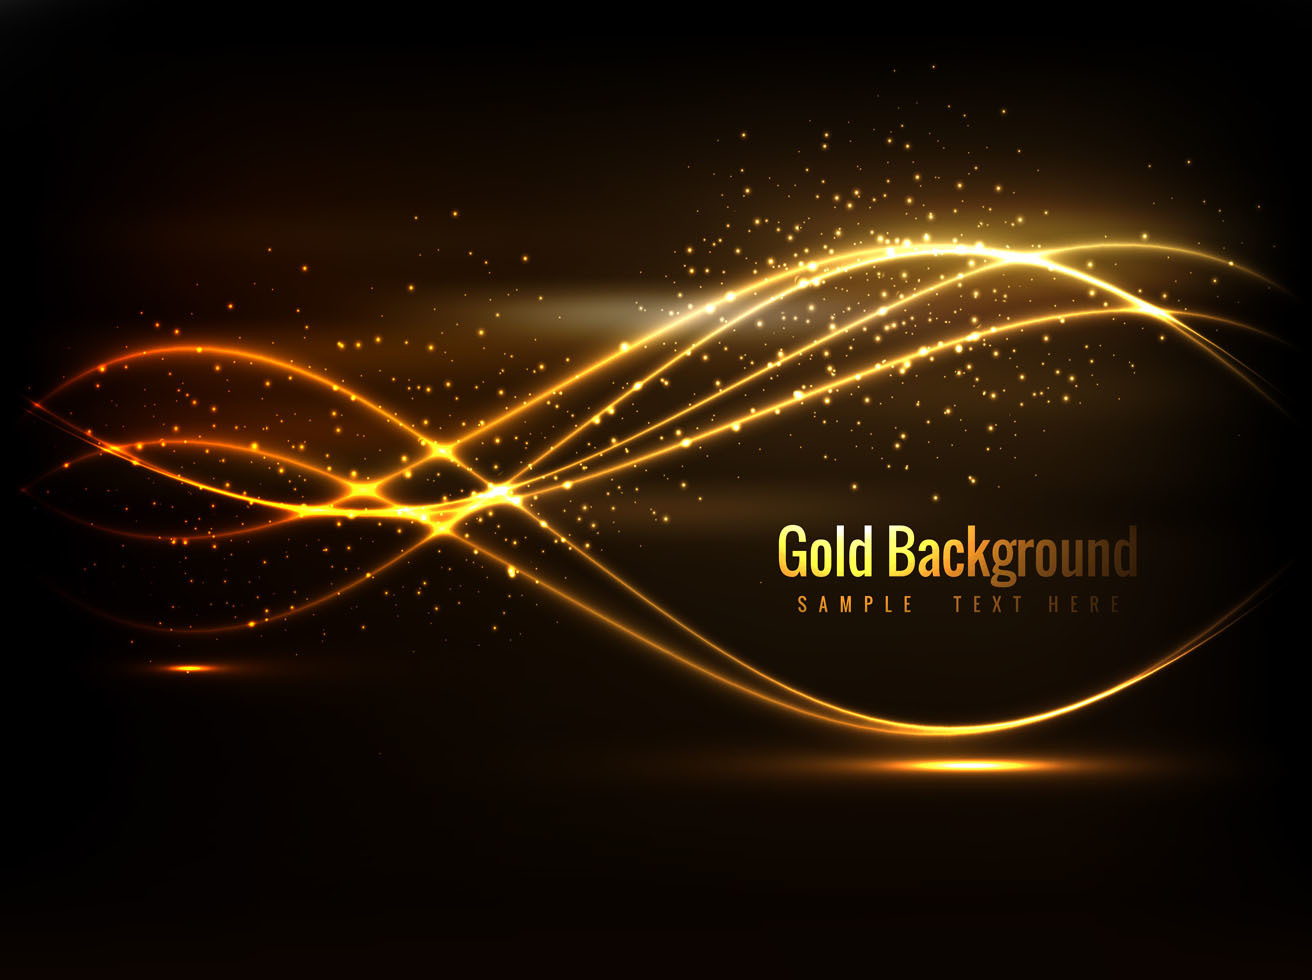 Download Free Vector Beautiful Gold Background Vector Art ...